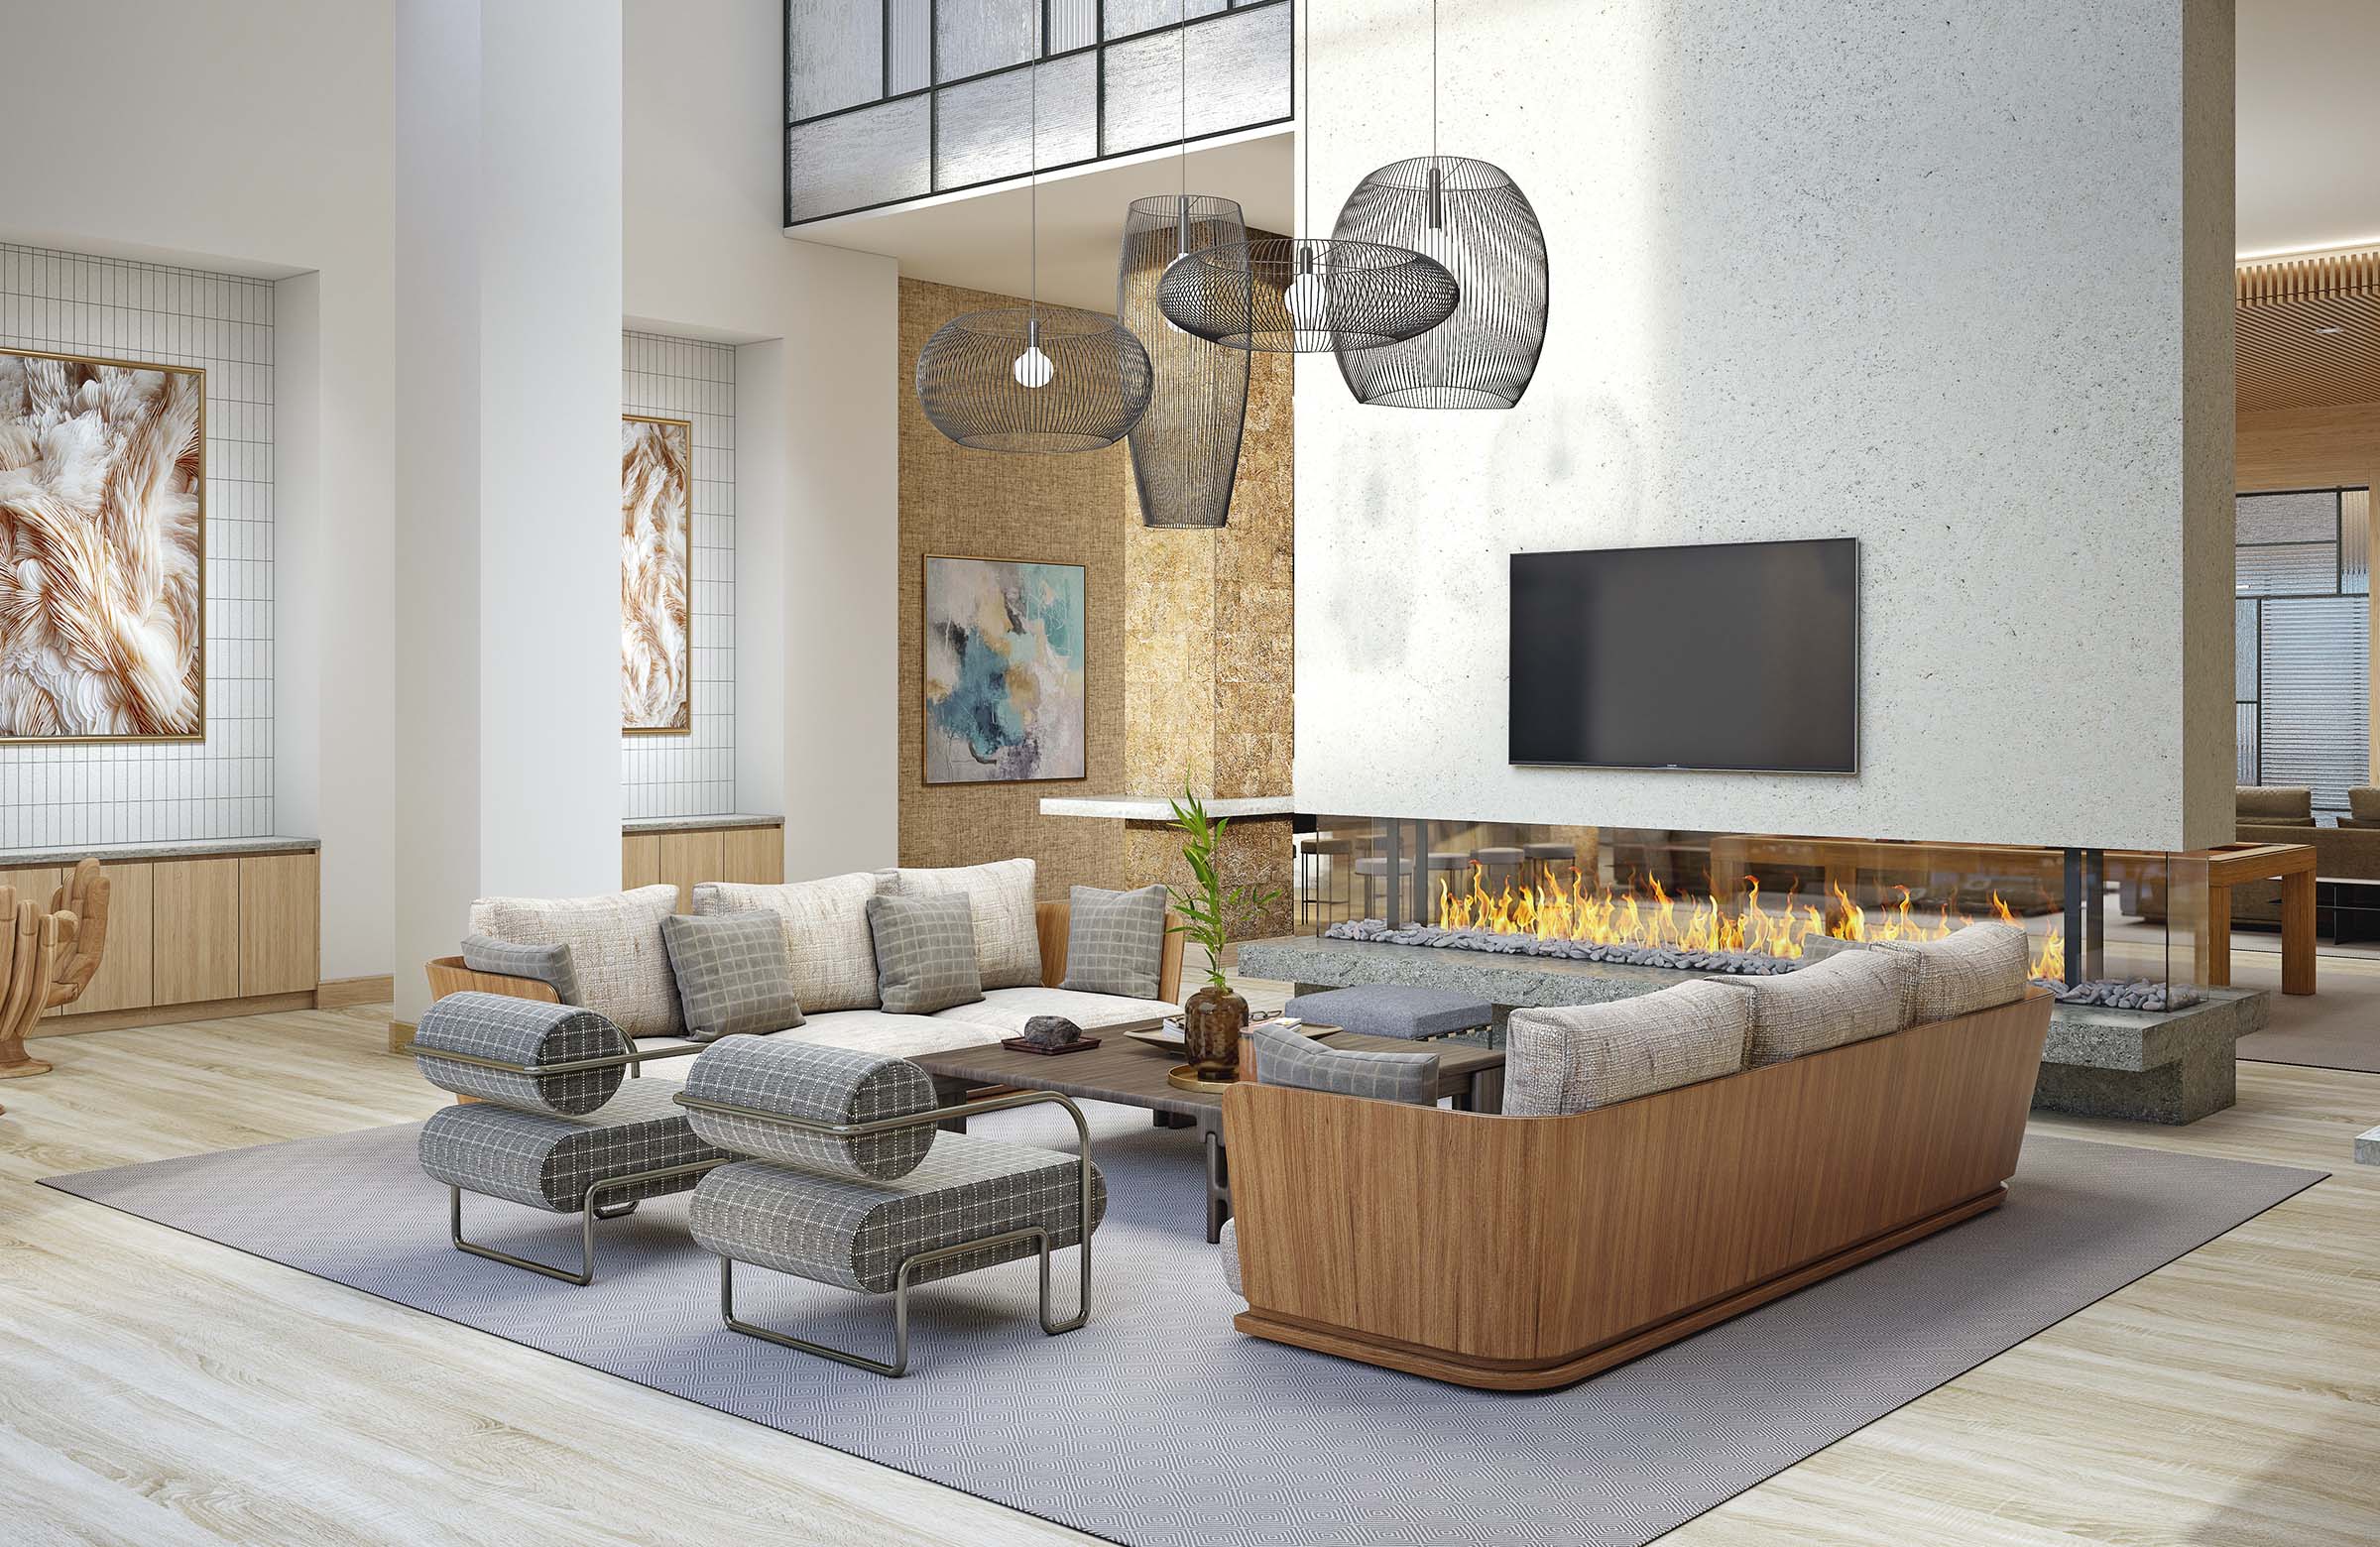 Interior of modern clubroom with open fireplace, couches, and chairs